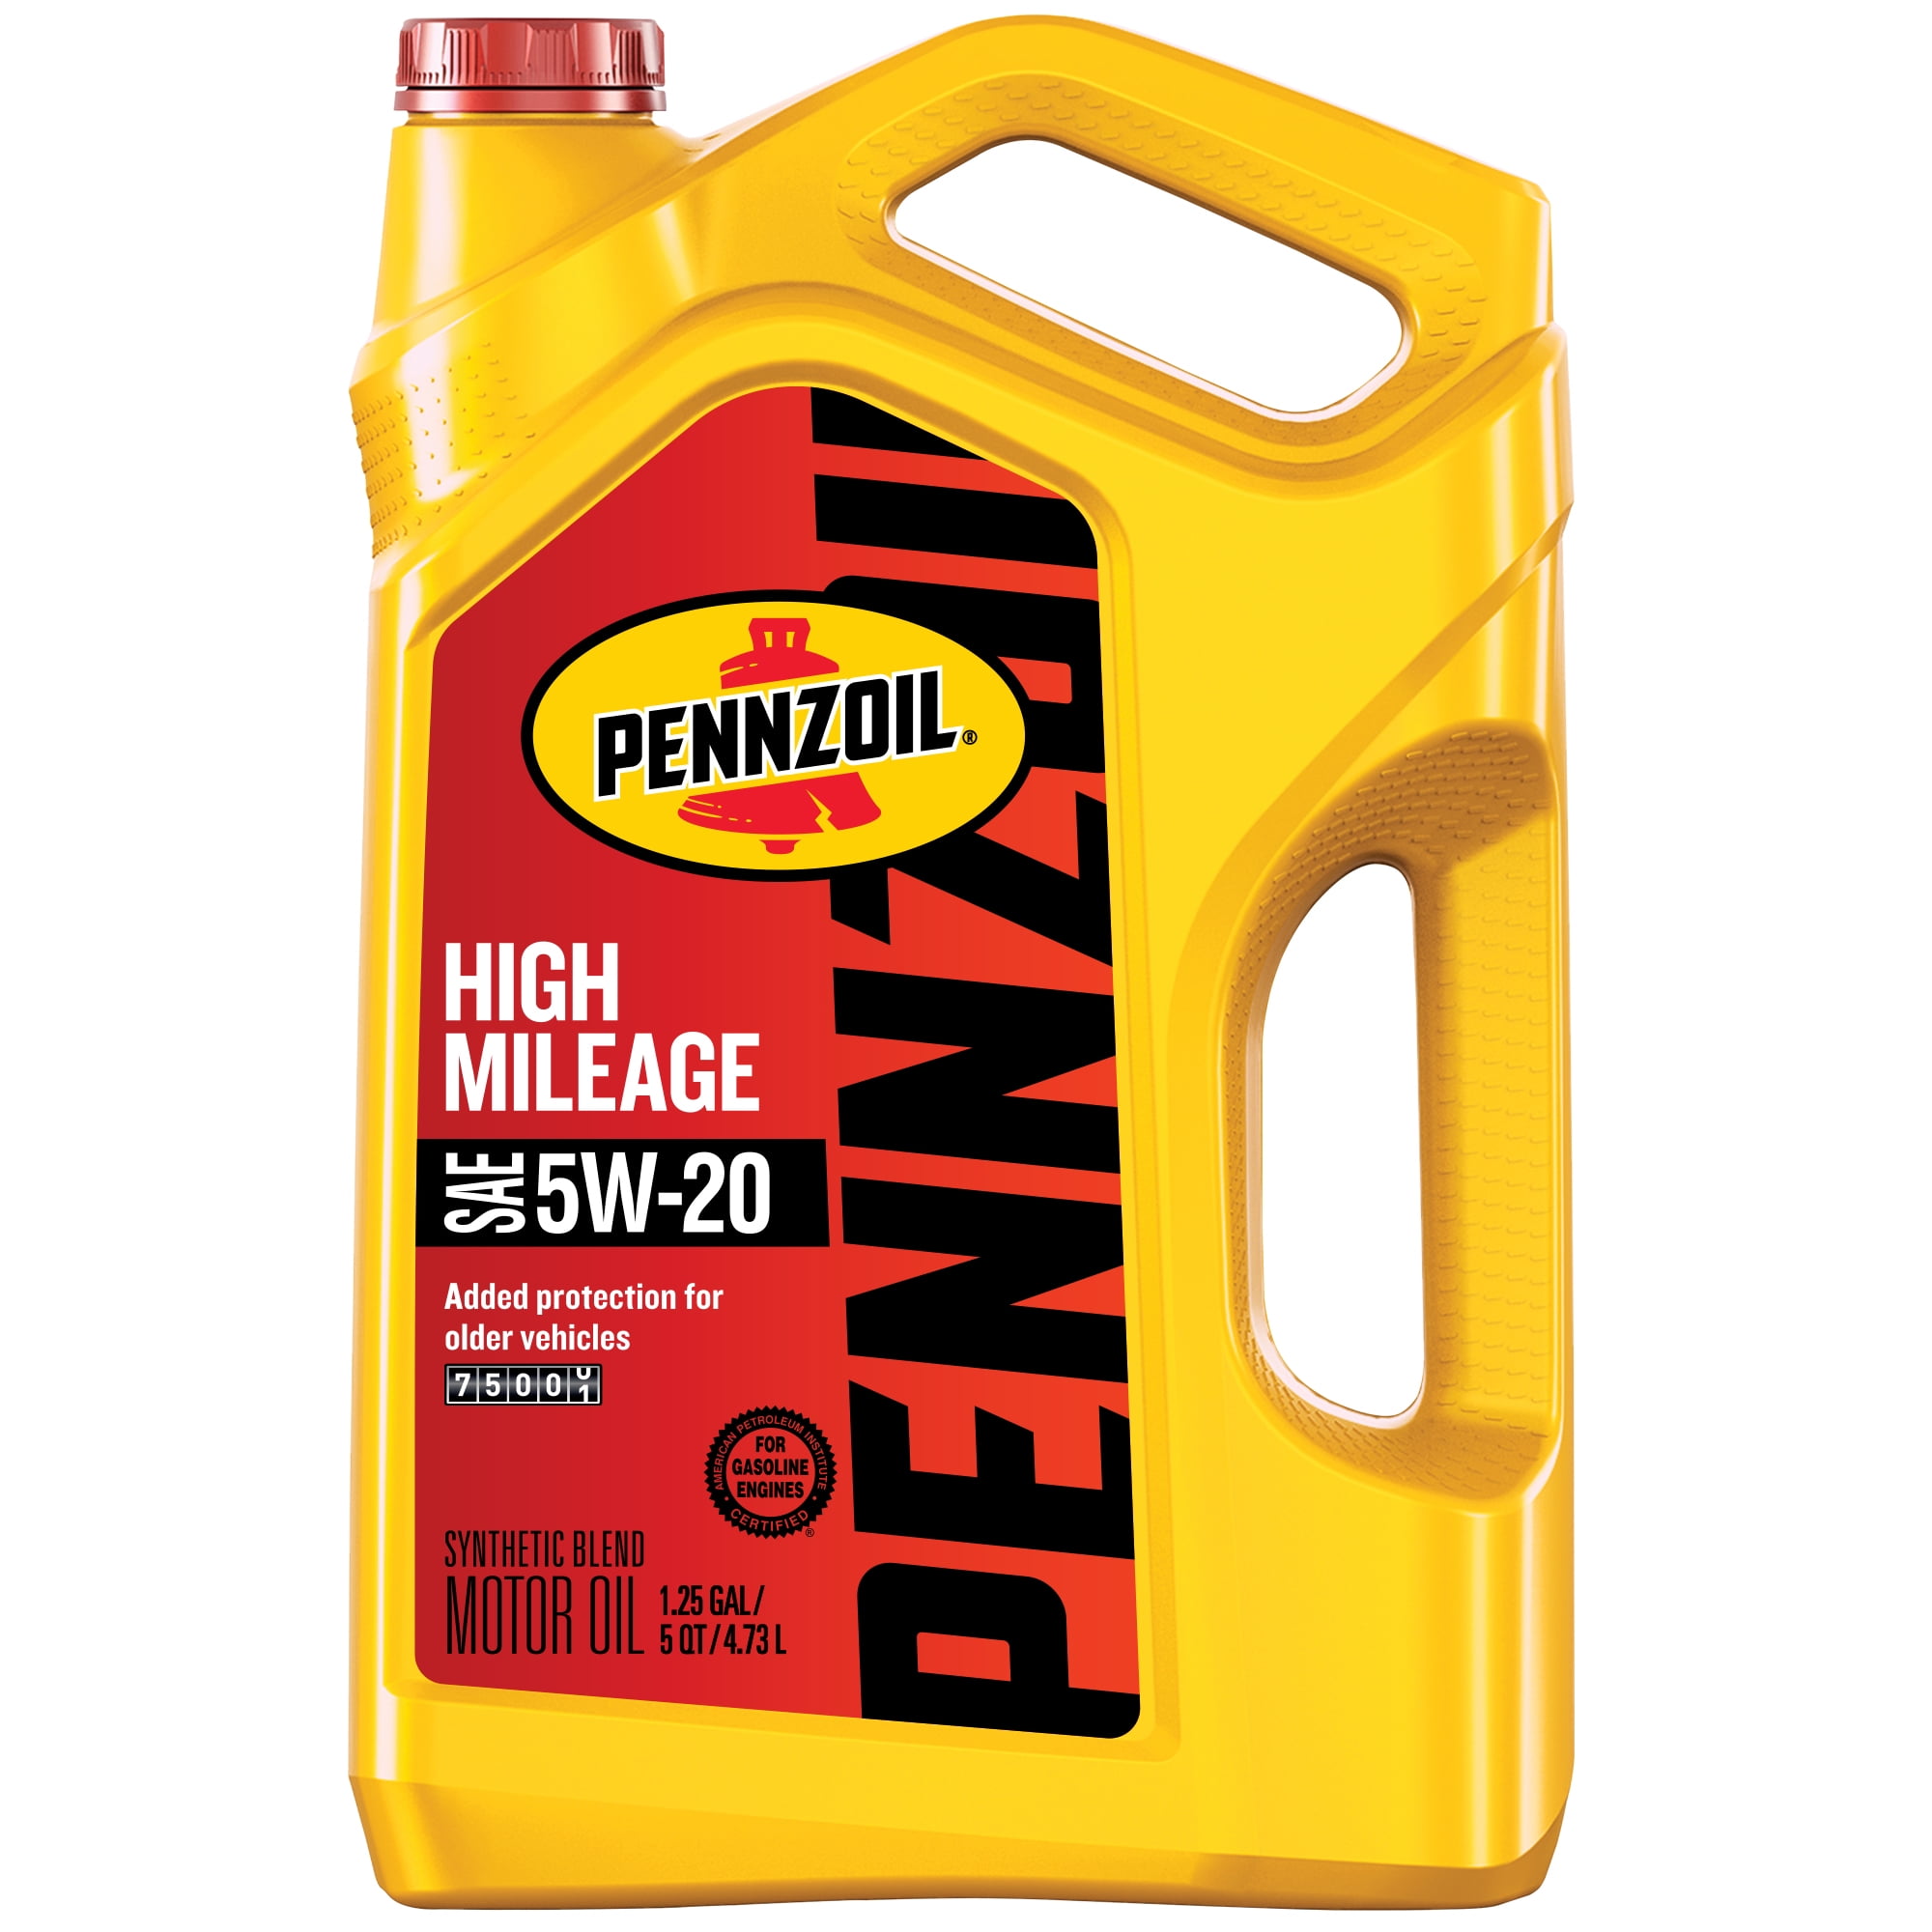 pennzoil-high-mileage-5w-20-motor-oil-for-vehicles-over-75k-miles-5